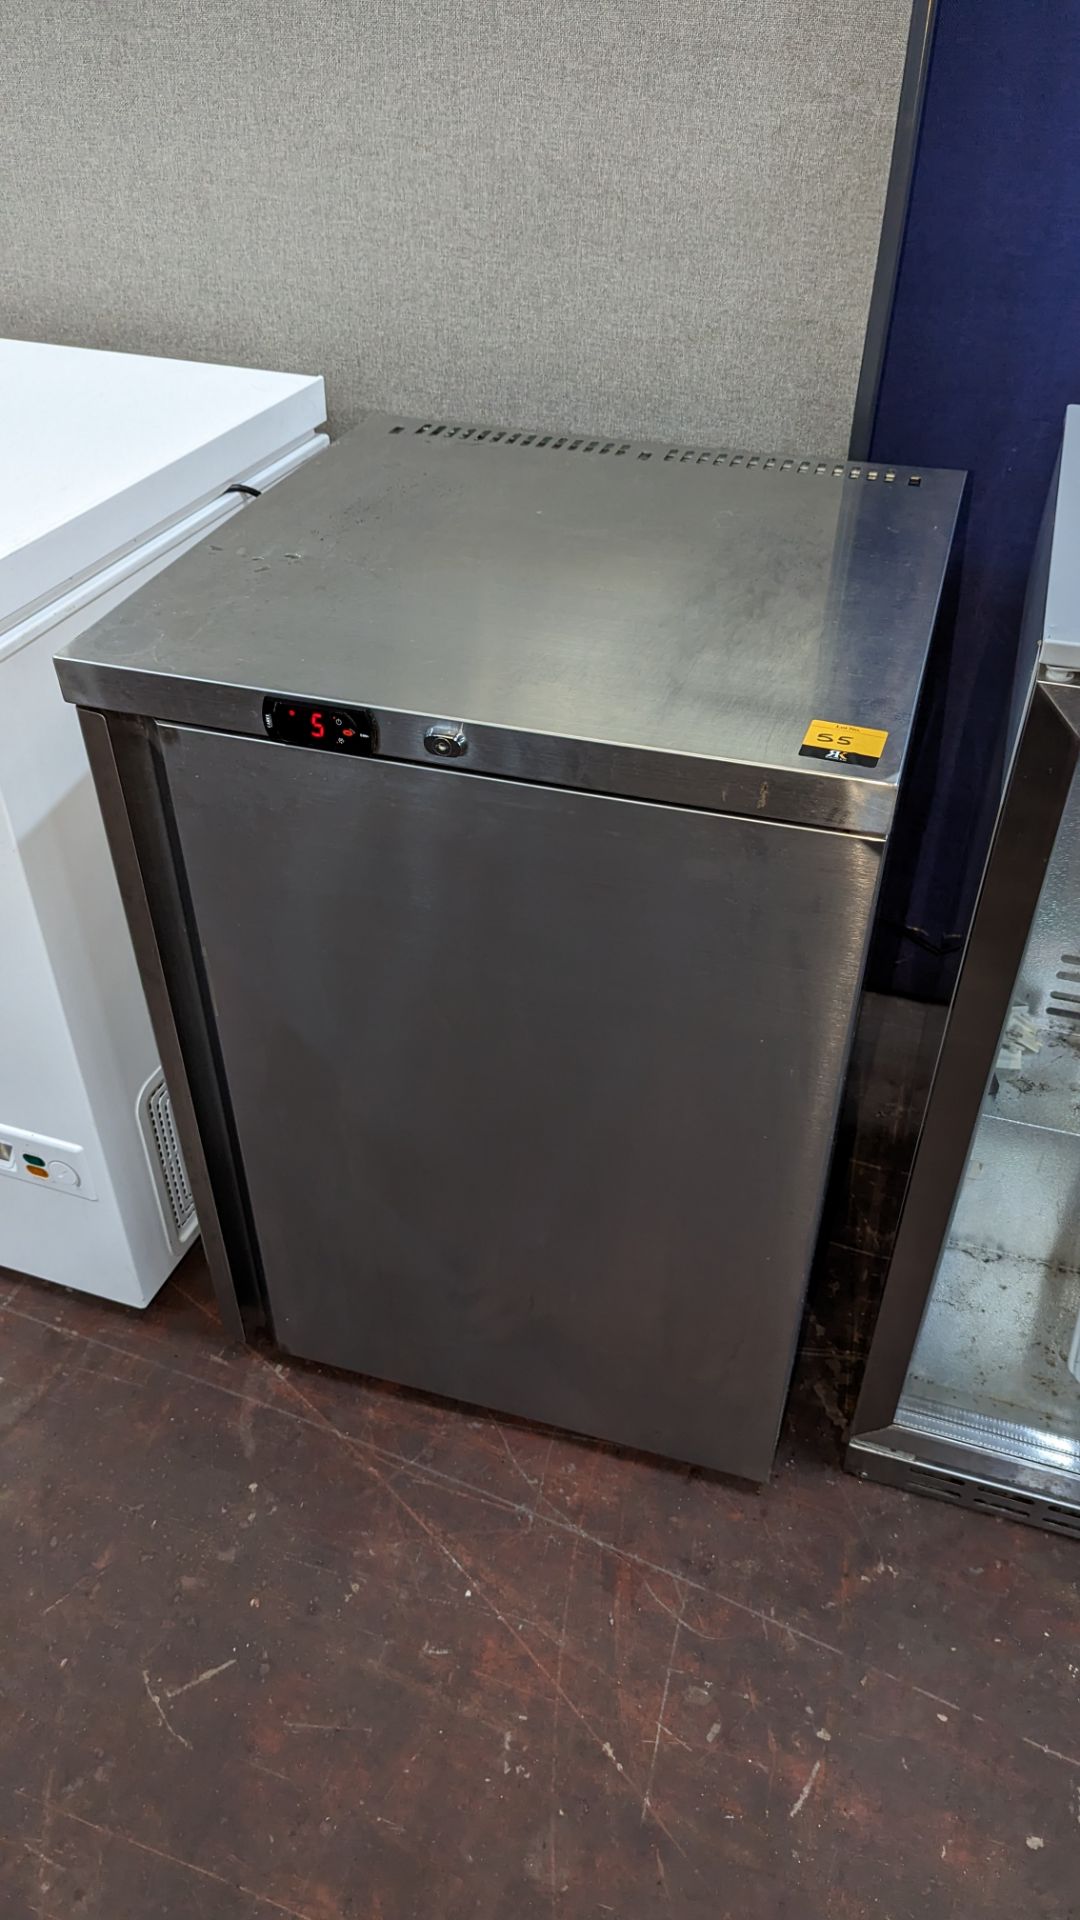 Stainless steel under counter freezer. Understood to have been purchased new in late 2018